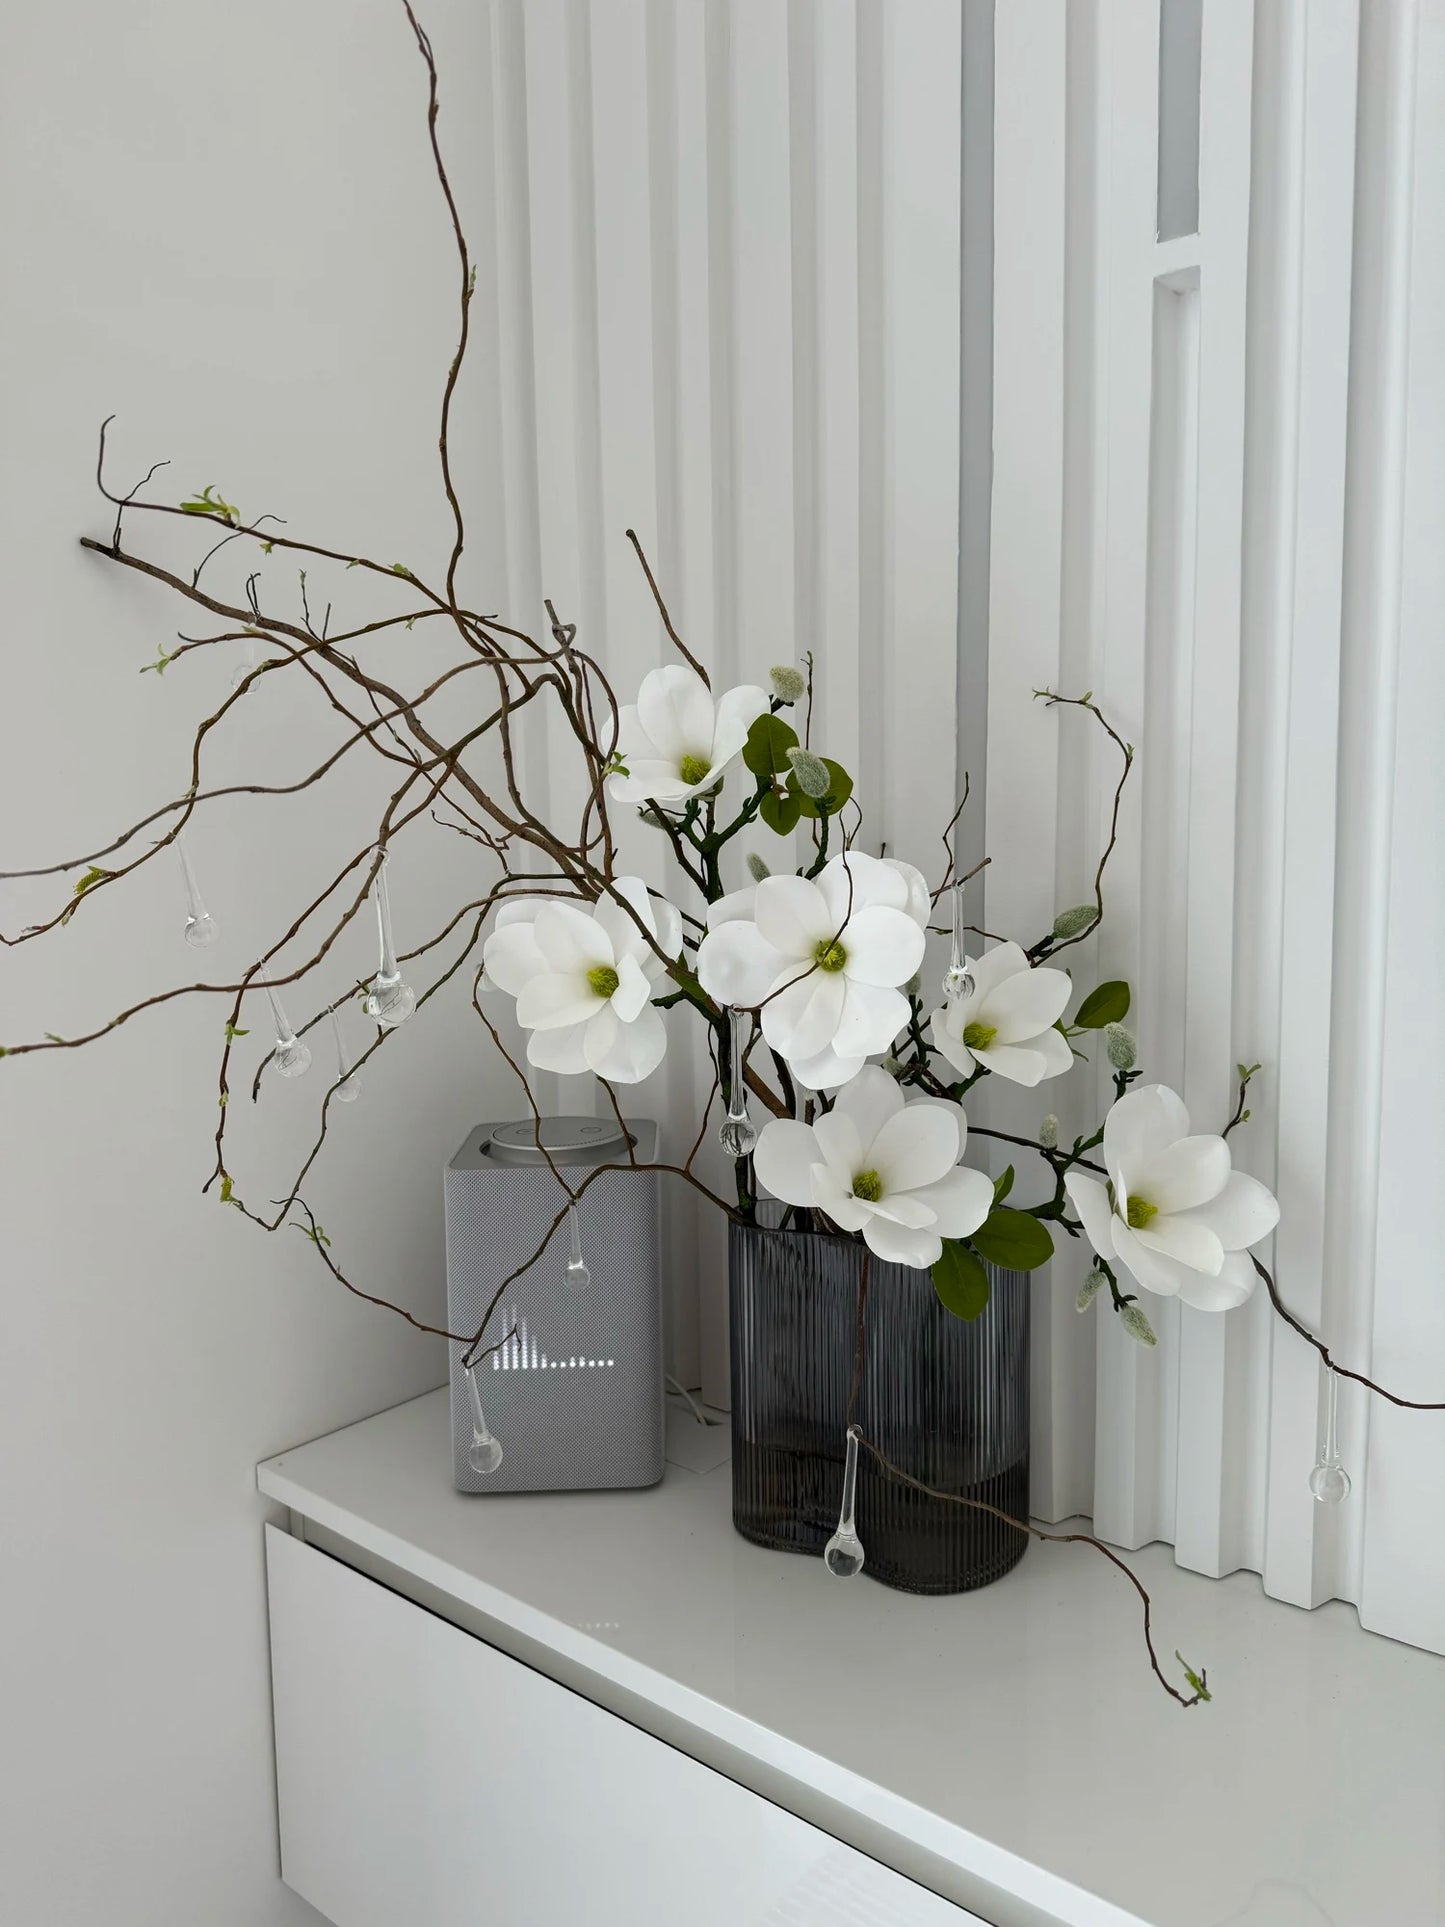 Artificial flower, magnolia/white, stem 56cm with 3 flowers, pack of 3 stems